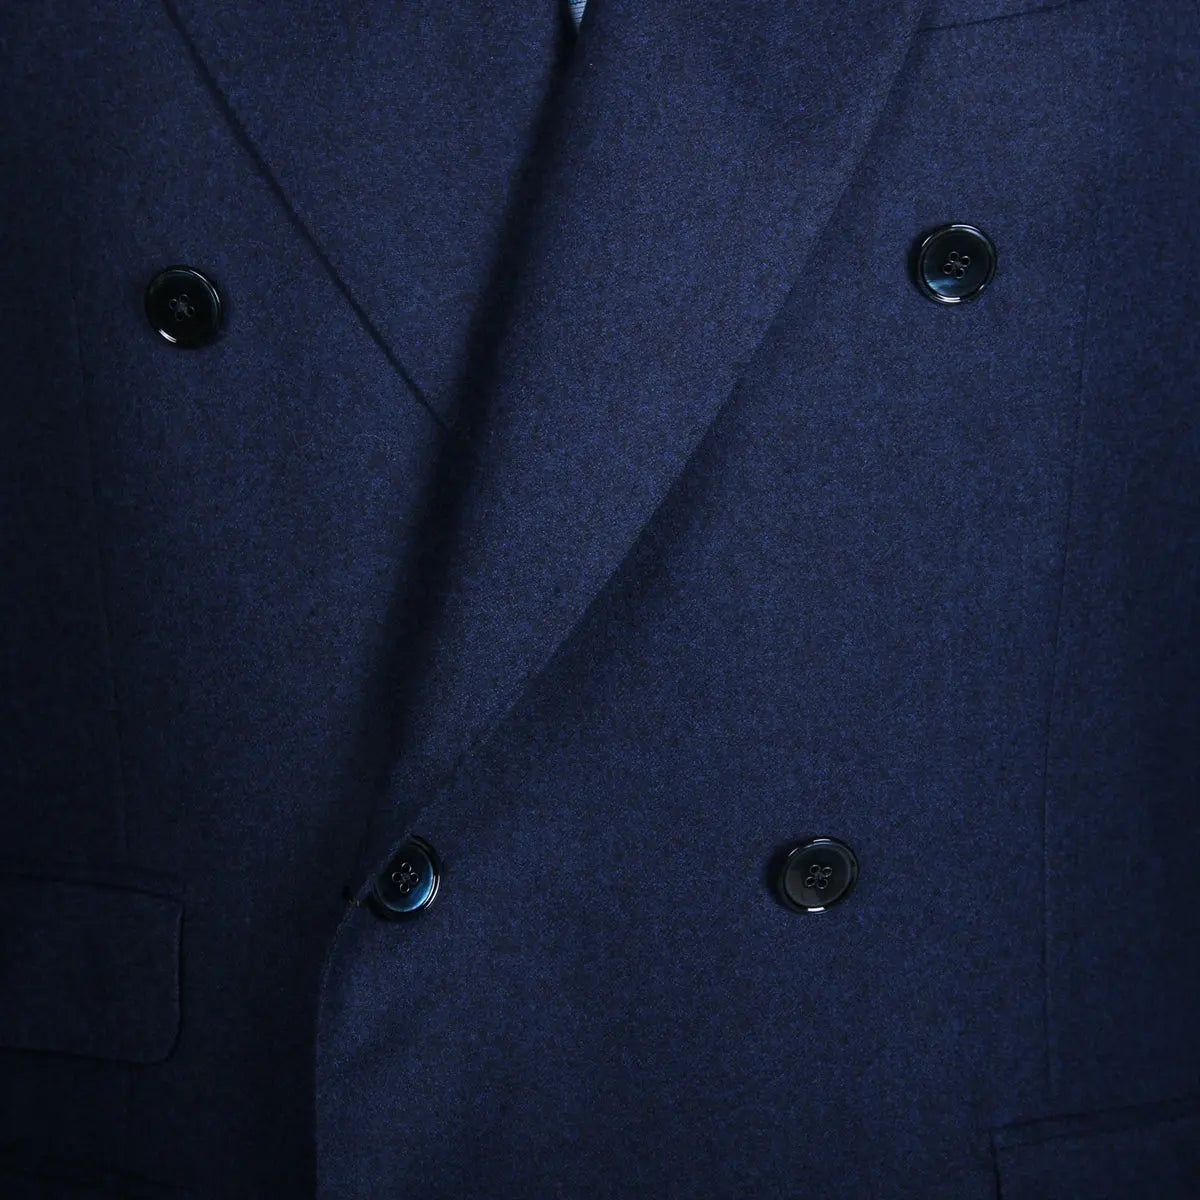 Dark Navy Wool Flannel Double-Breasted Suit  Robert Old   